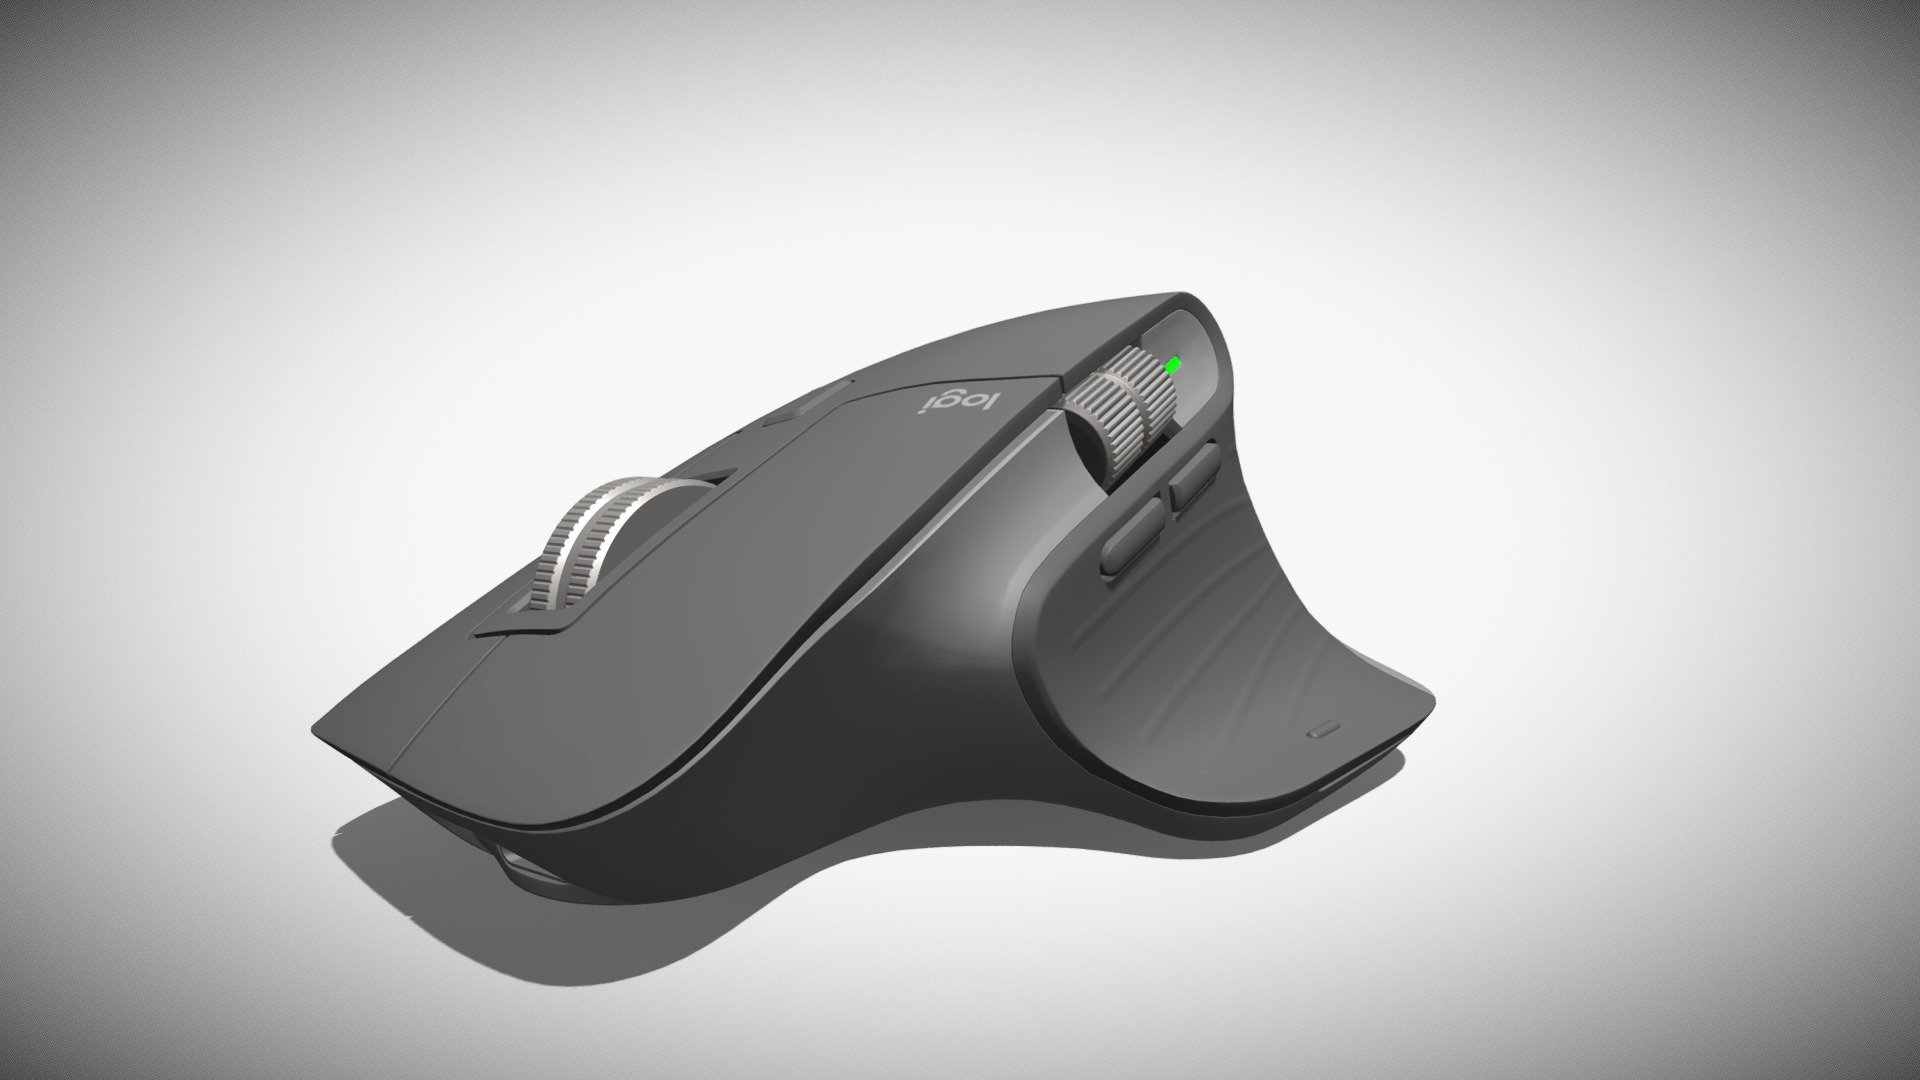 Detailed 3D model of a black Logitech MX Master 3 Mouse, modeled in Cinema 4D. The model was created using approximate real world dimensions.

The model has 42,634 polys and 43,304 vertices.

An additional file has been provided containing the original Cinema 4D project files with both standard and v-ray materials, textures and other 3d export files such as 3ds, fbx and obj 3d model